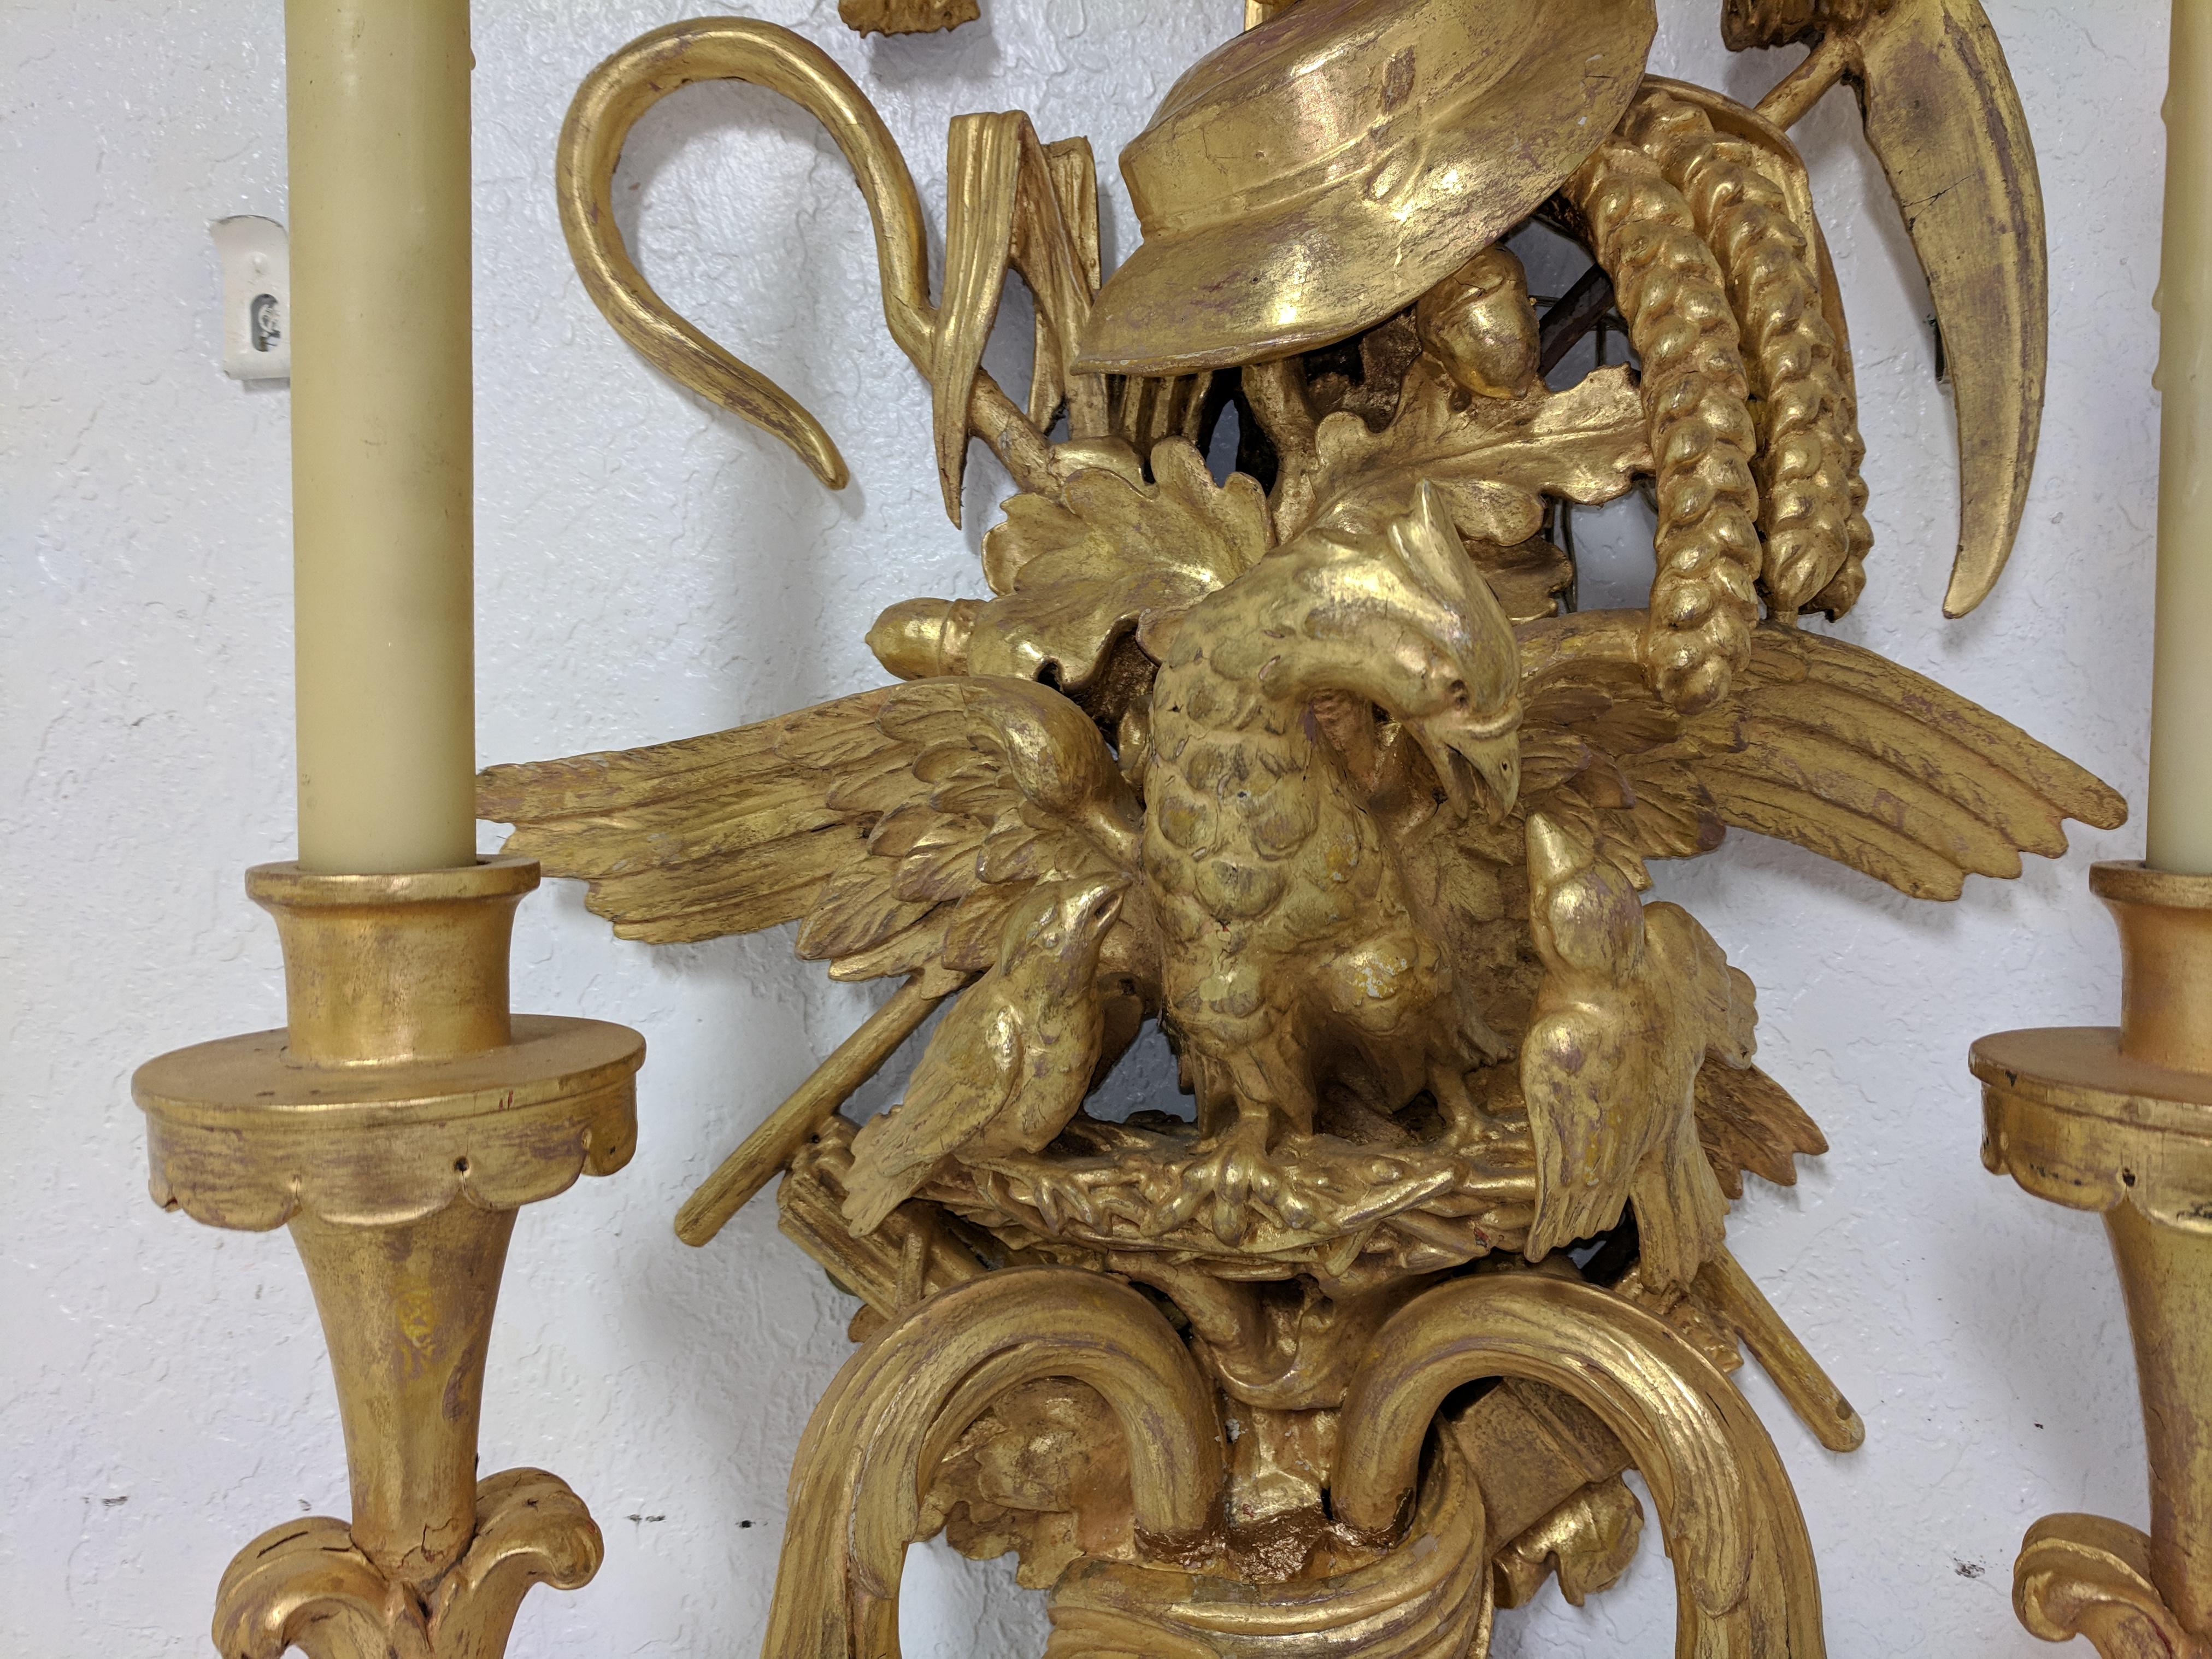 Tall pair of antique French Louis XV-style giltwood two-branch sconces.
Sconces feature a bow and two sets of tassels at top.
Beneath the tassels there is hat, a sythe, wheat sheaves, a hook,
corn husks and oak leaves with acorns.
A large bird